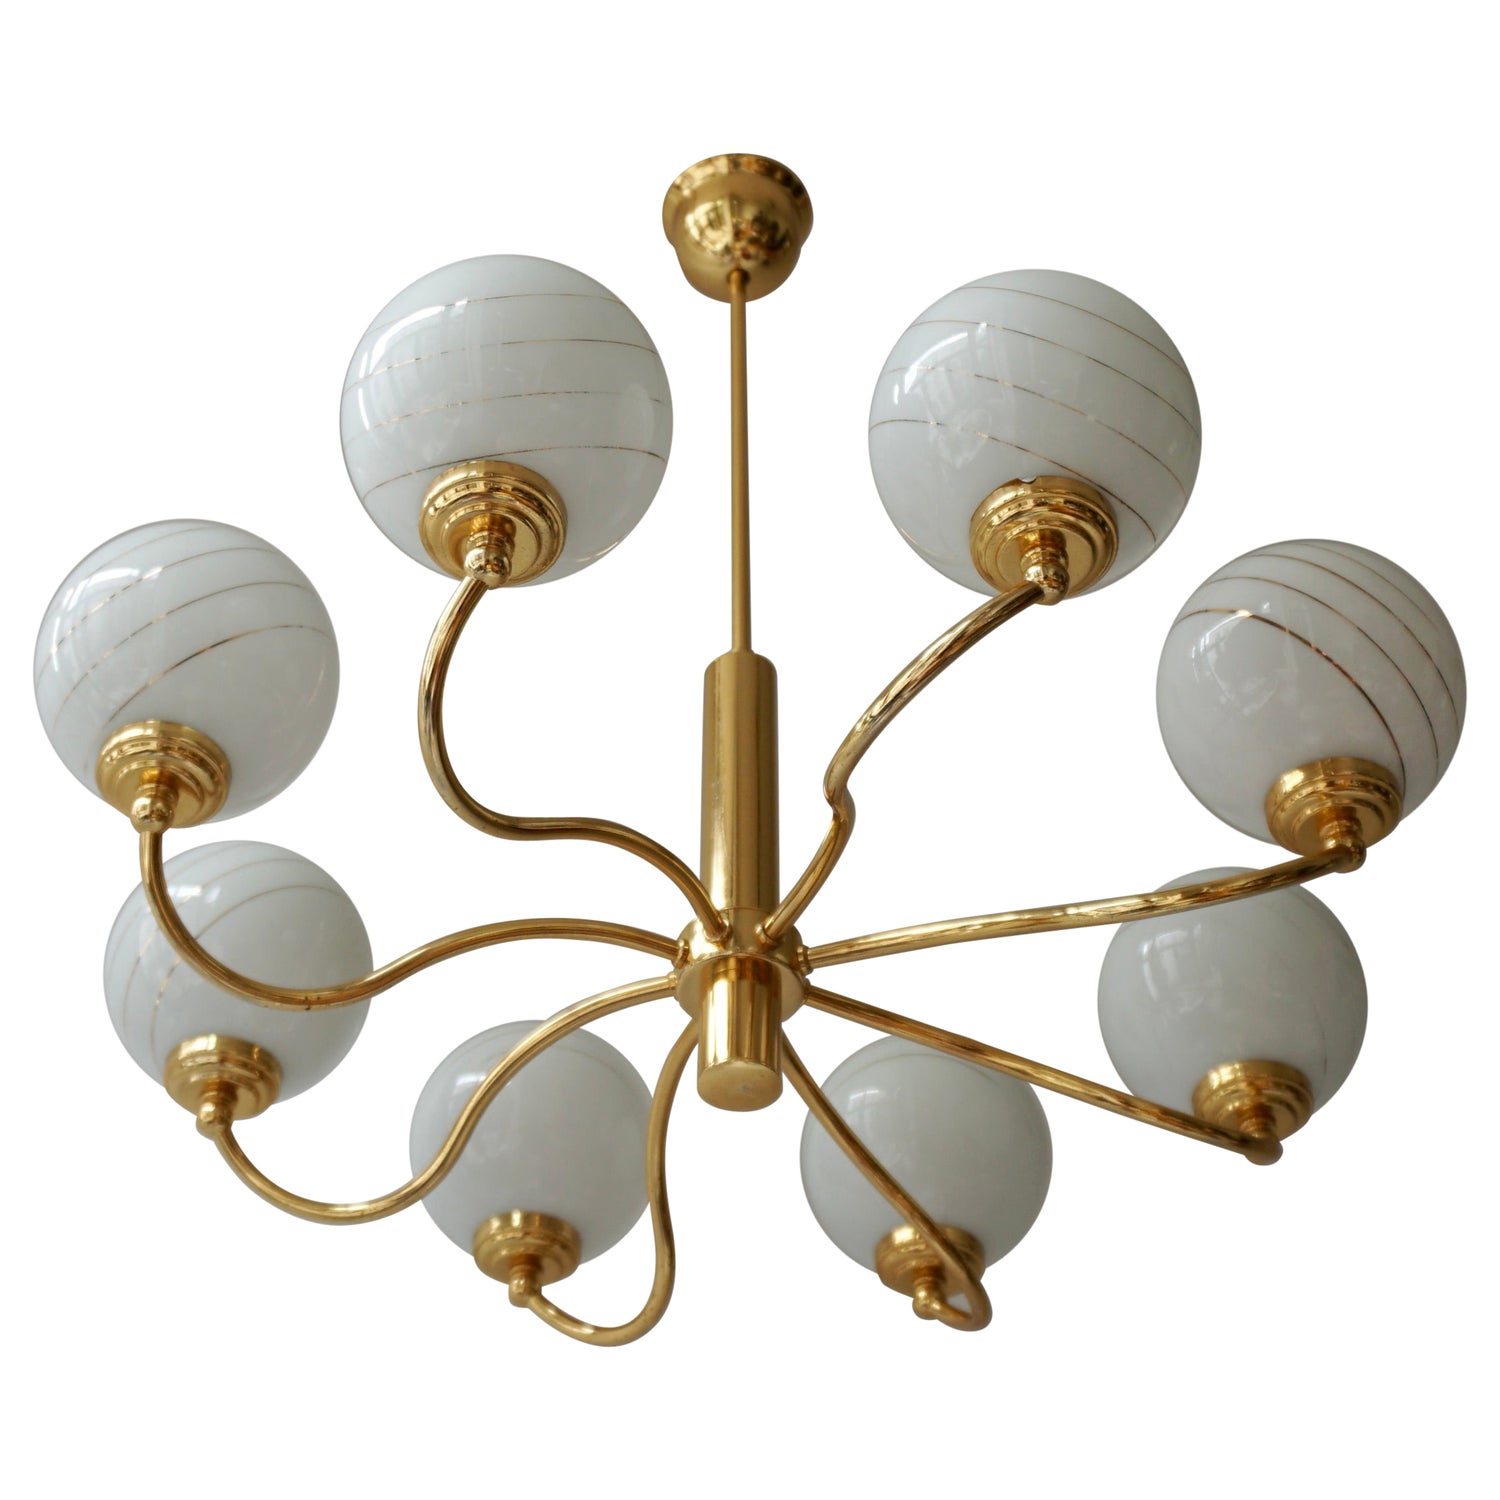 Italian Ceramic and Brass Pineapple Chandelier, circa 1970s For